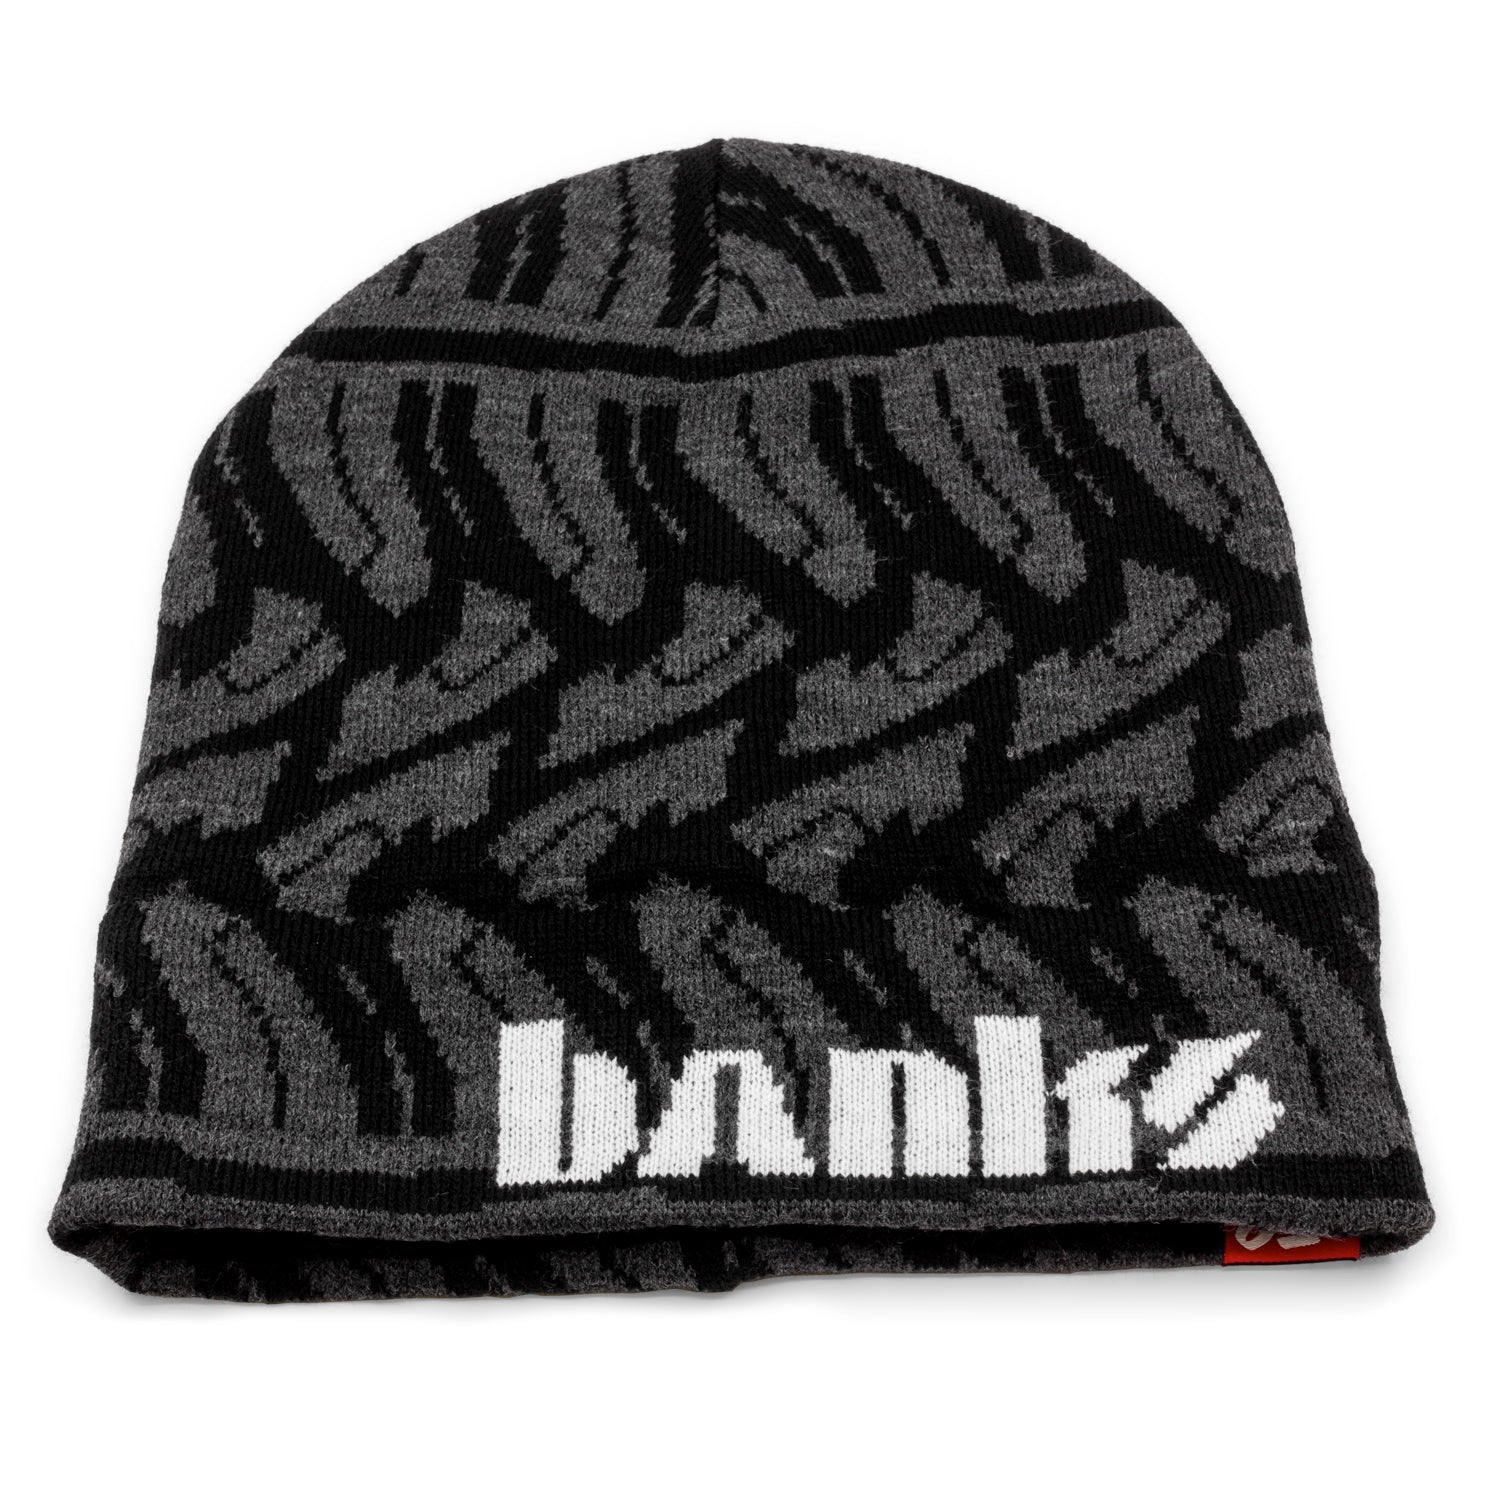 Banks Beanie with Tire Tread Pattern Folded Down